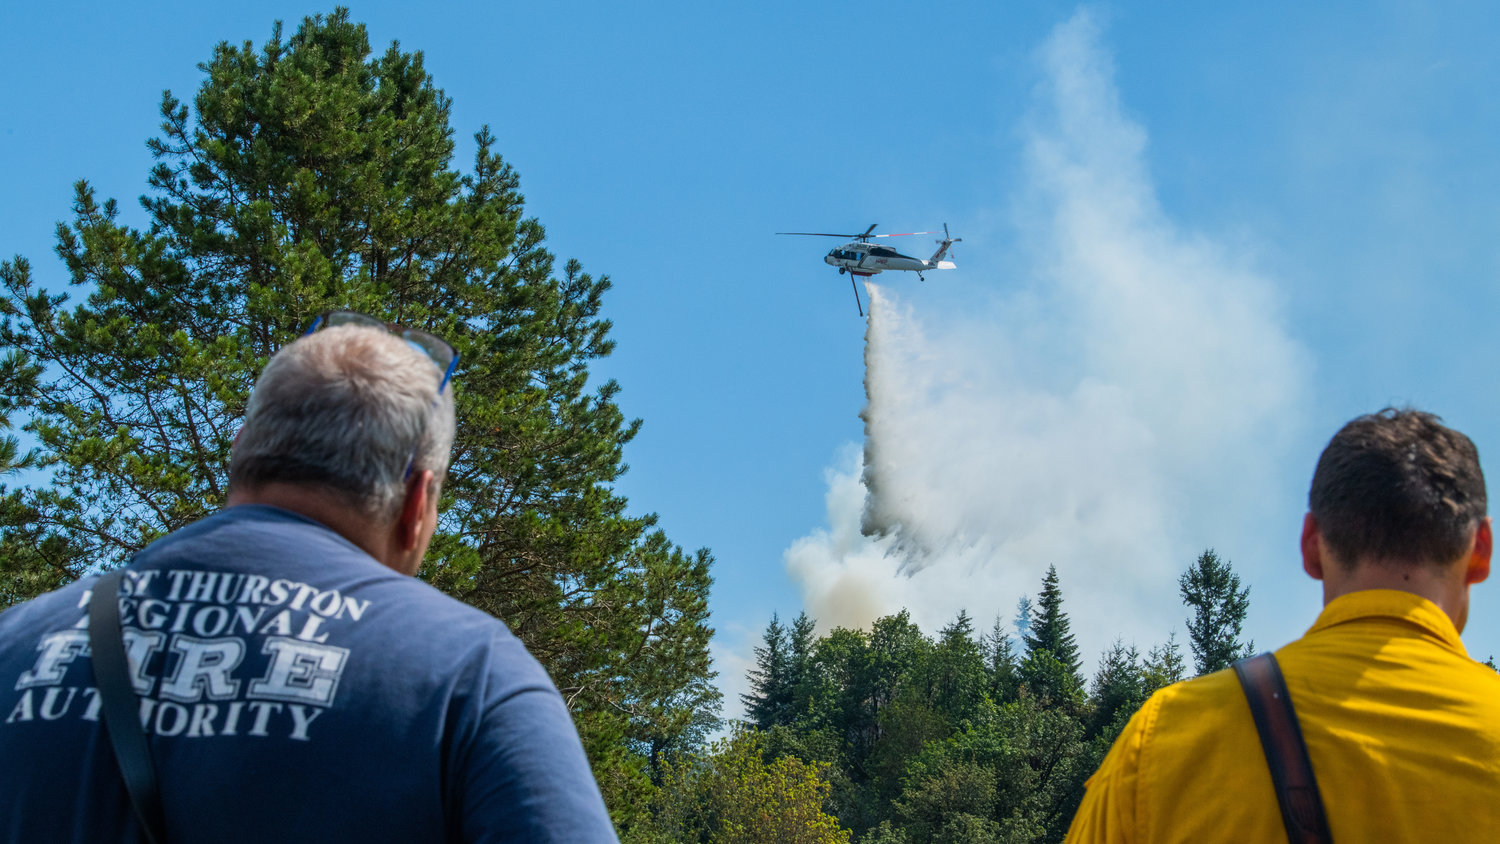 West Thurston Fire Authority Chief Robert Scott watches alongside crews from the Department of Natural Resources as a helicopter flies overhead dumping water on a forest fire near Bucoda after pulling water from the Skookumchuck River Monday afternoon.